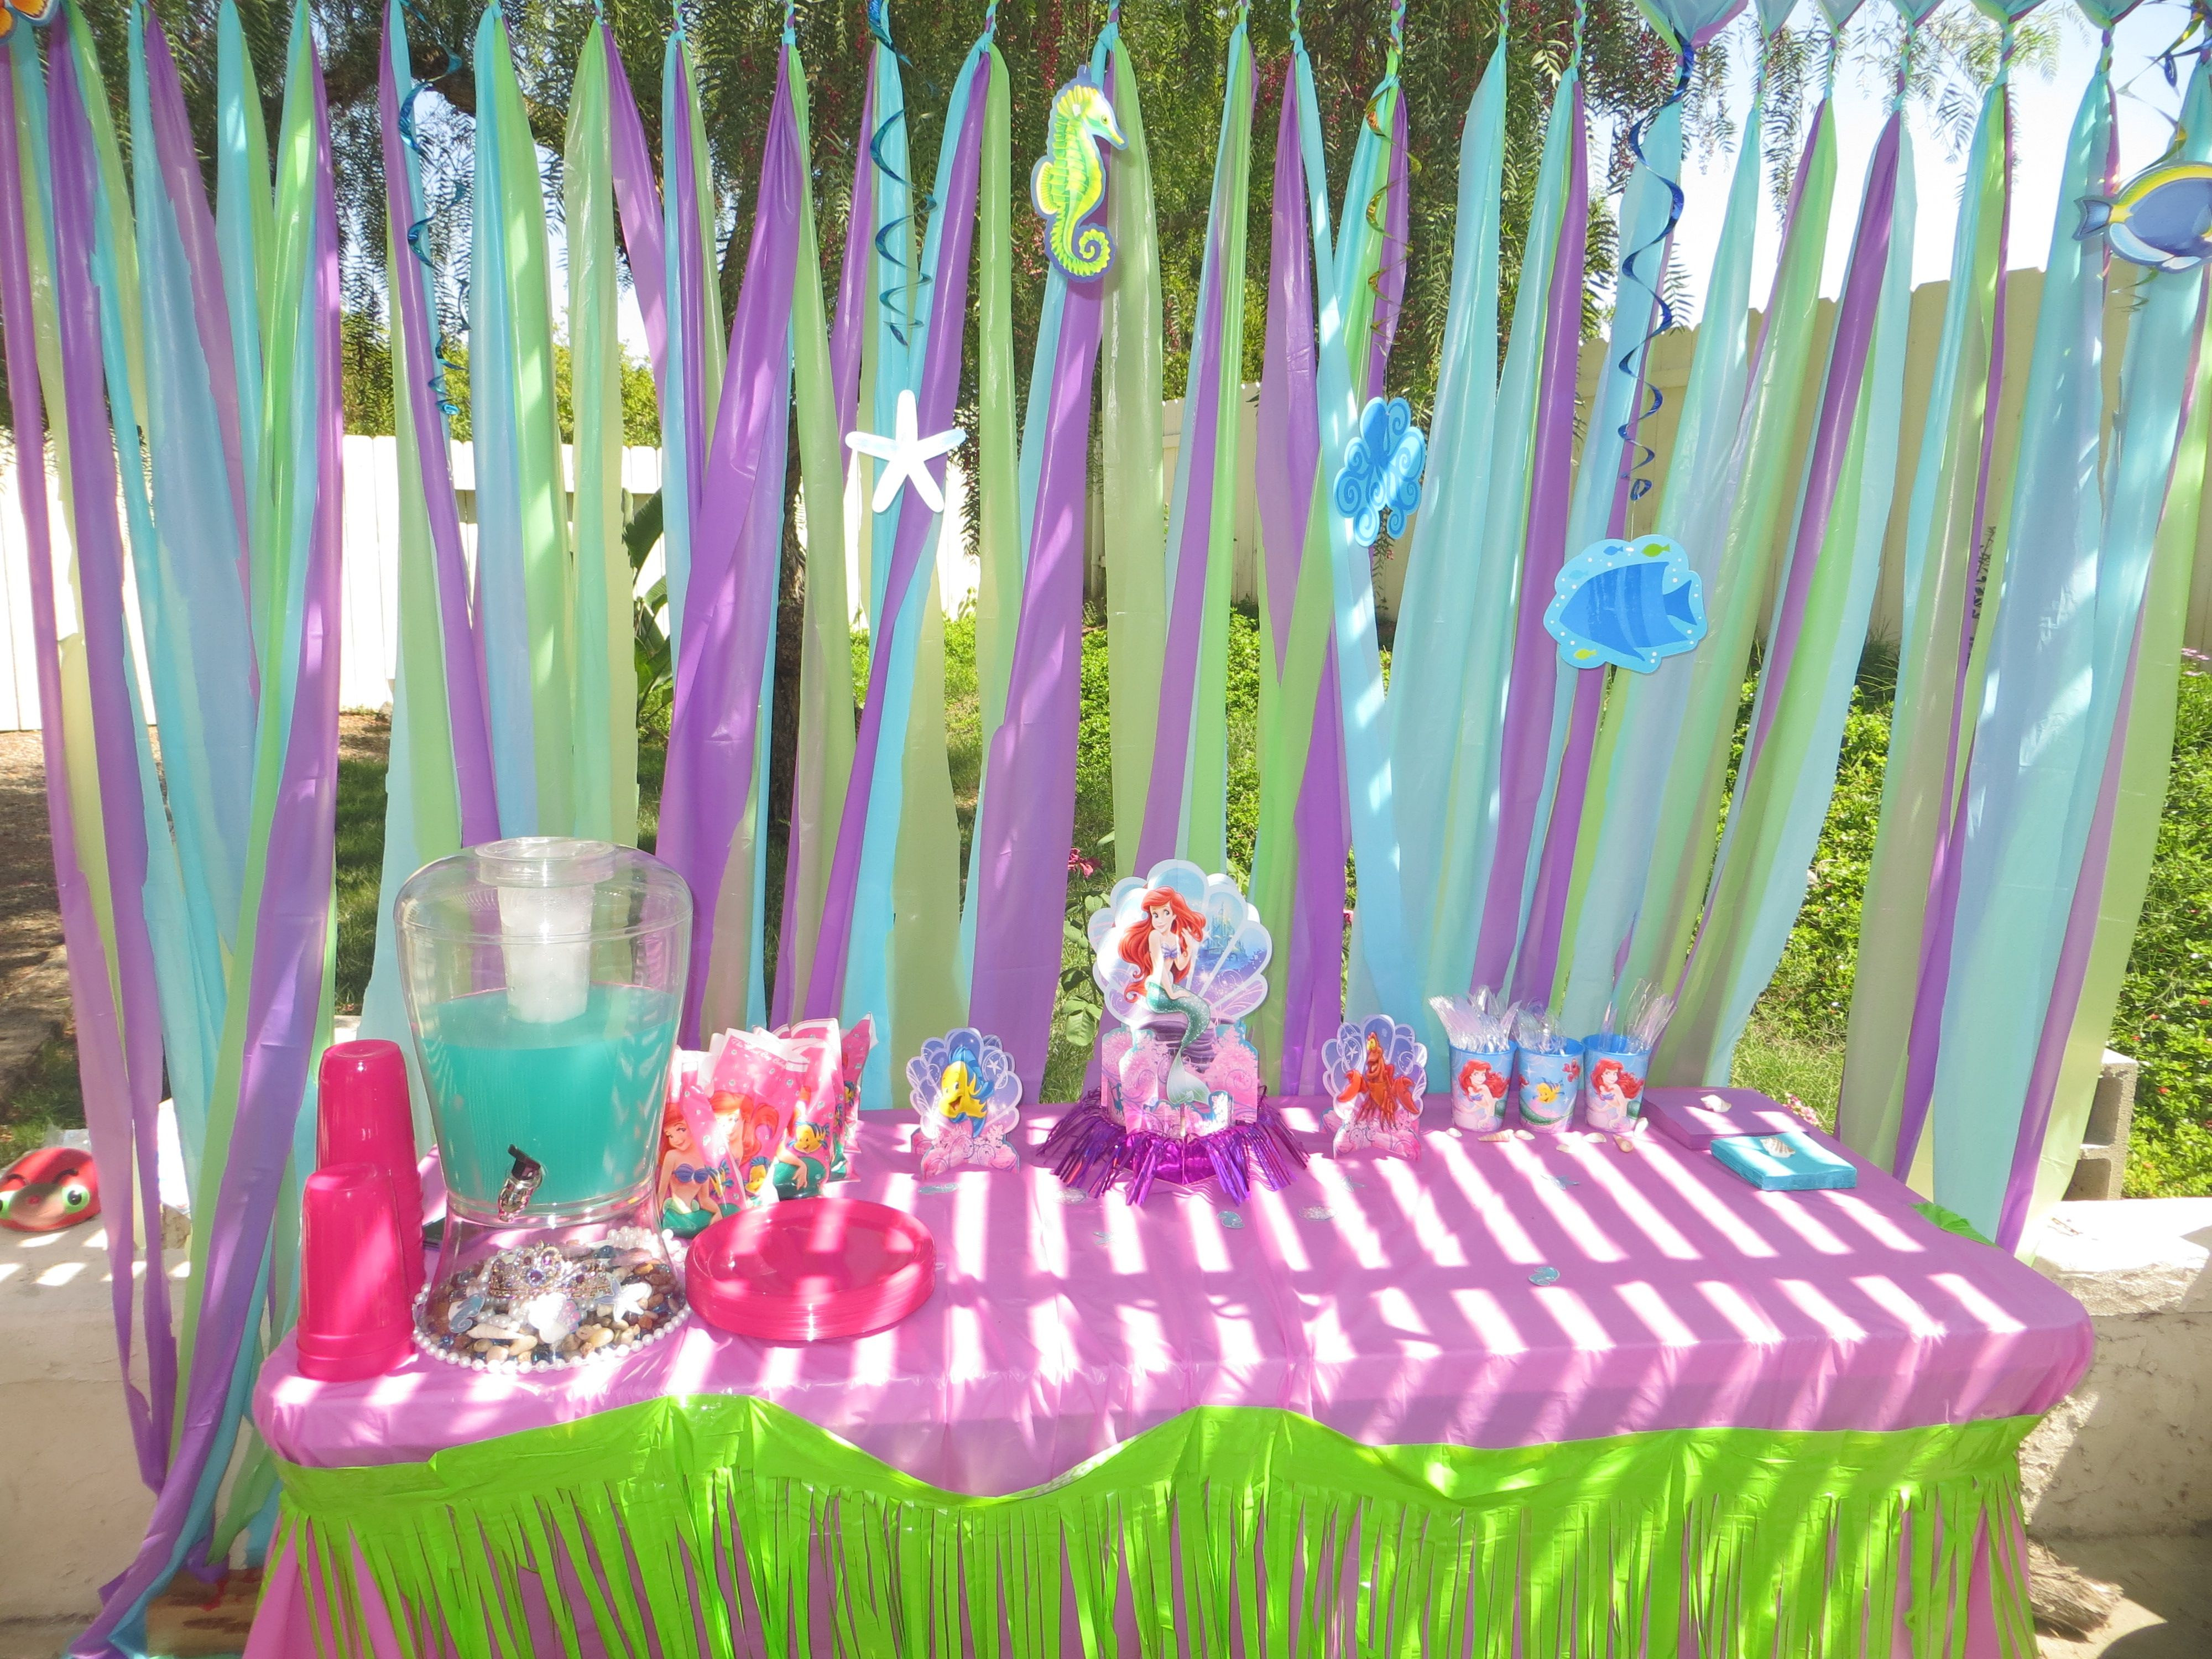 The Little Mermaid Party Ideas Pinterest
 Arianna s 3rd birthday party decorations The little